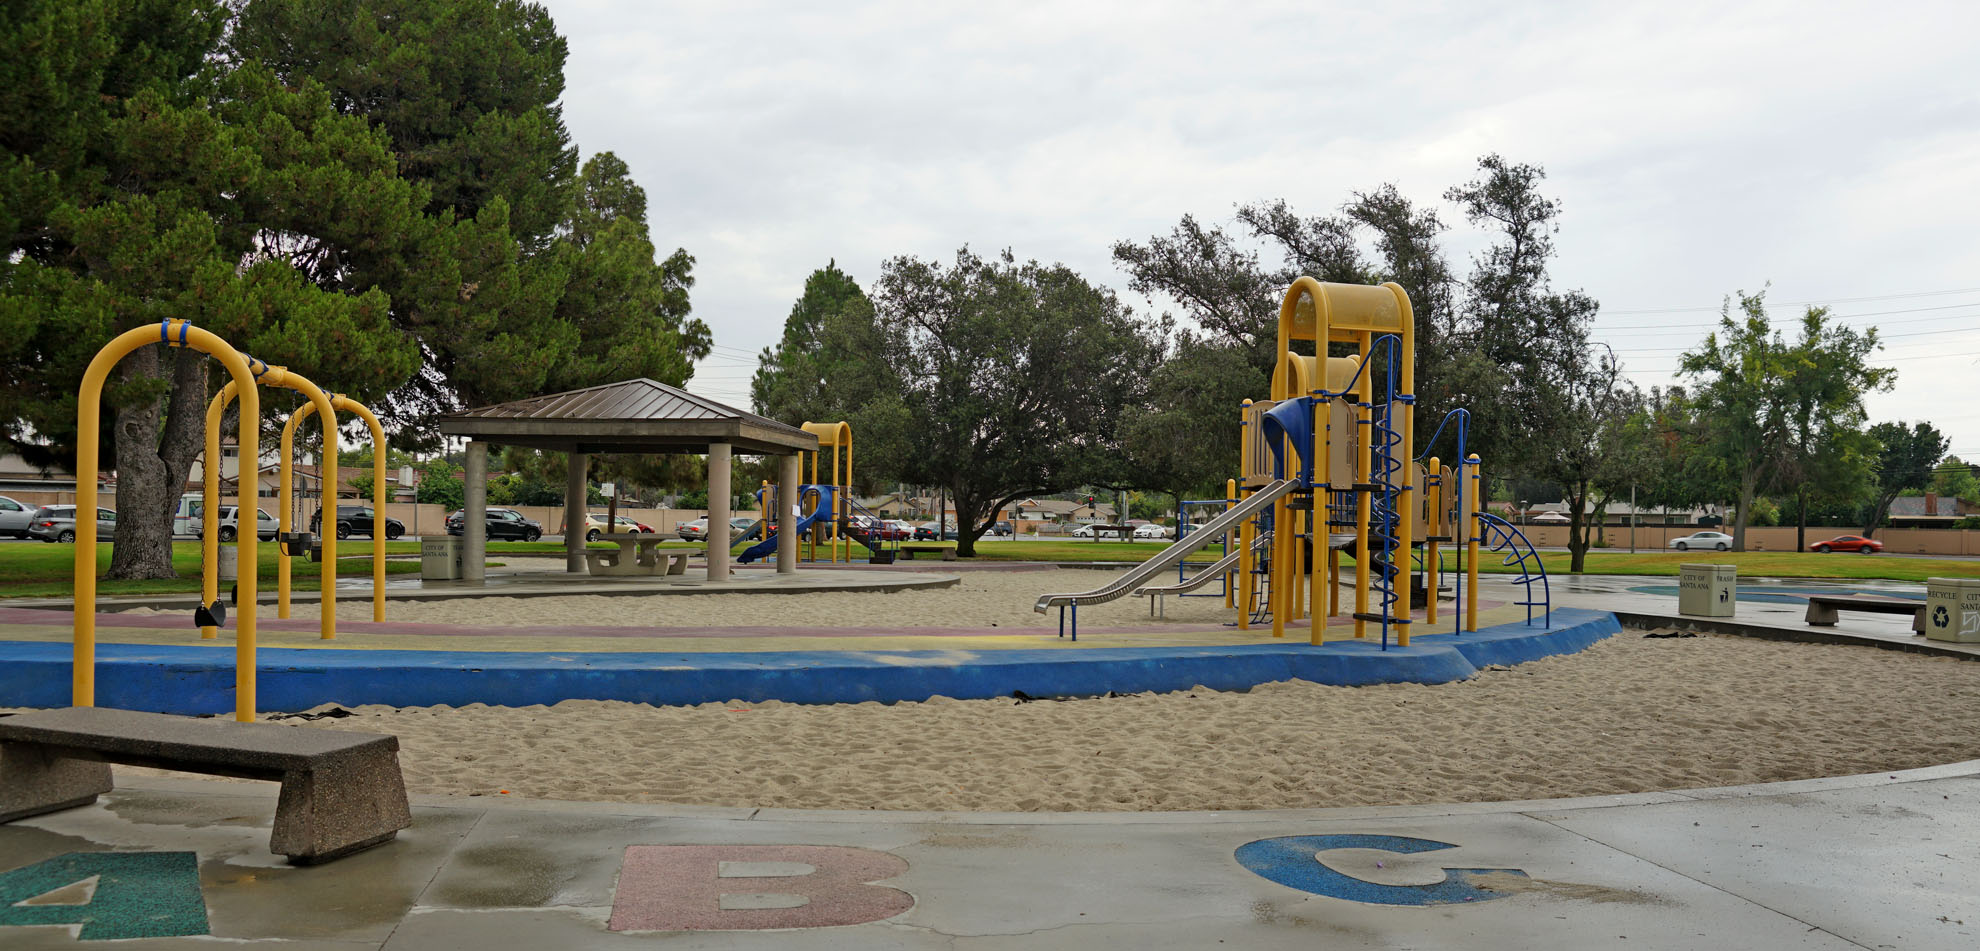 Playground and seating area at Adams Park